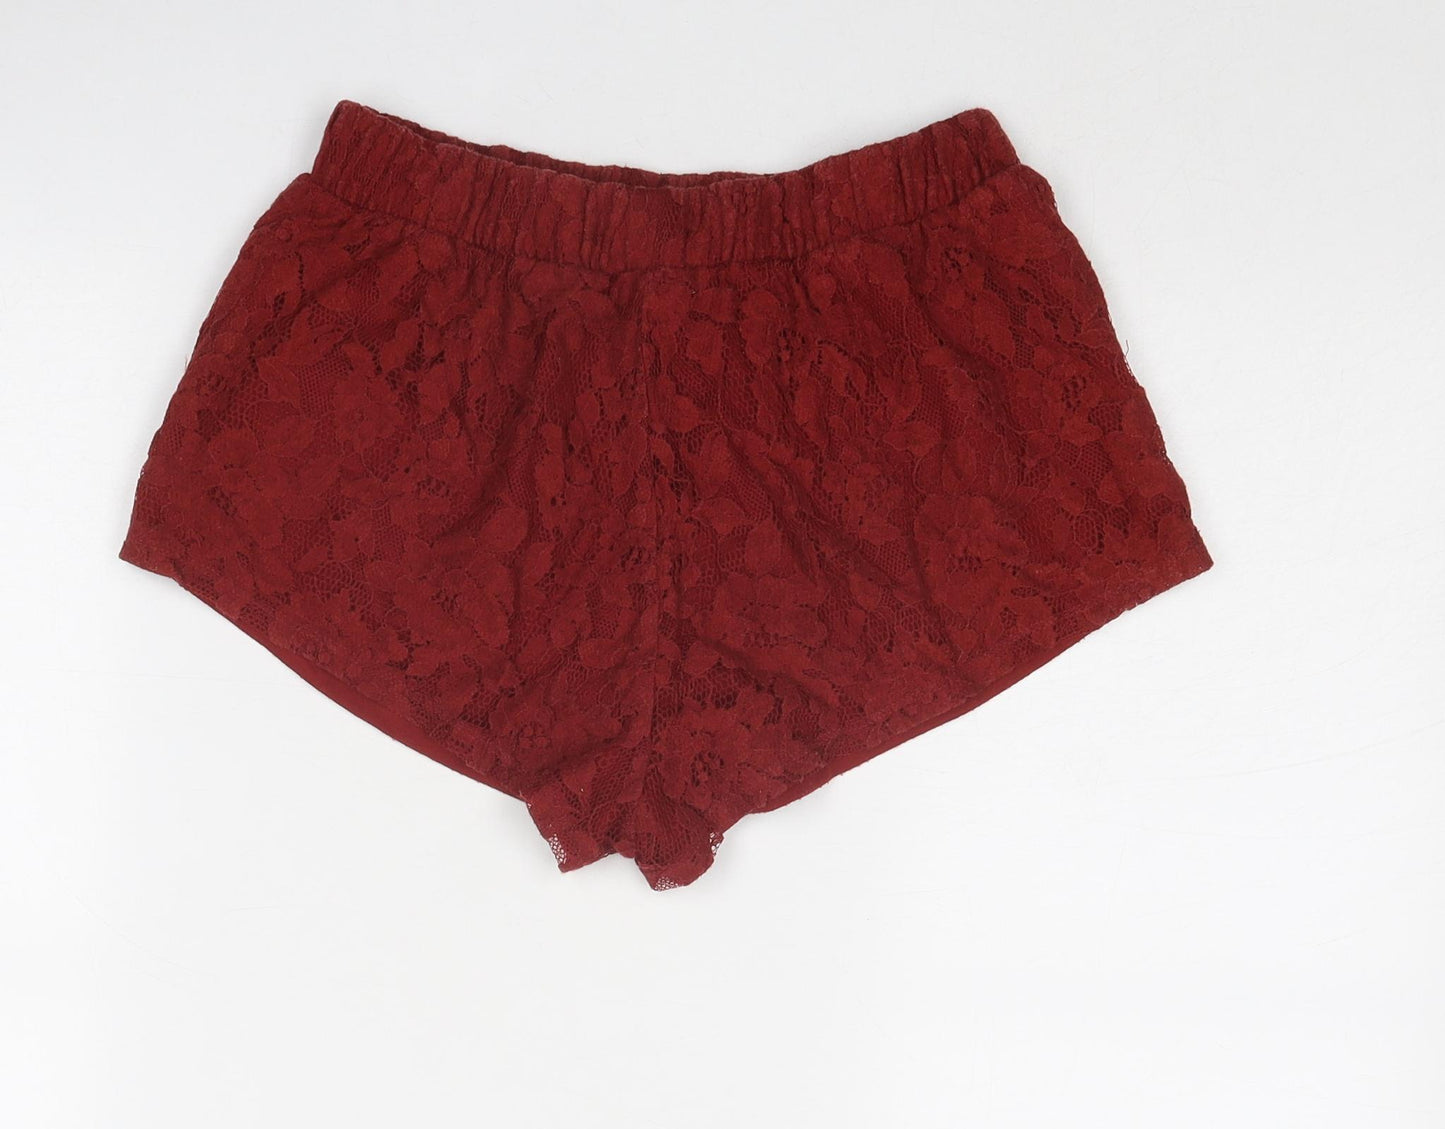 FOREVER 21 Womens Red Floral Cotton Hot Pants Shorts Size XS Regular Pull On - Lace Overlay